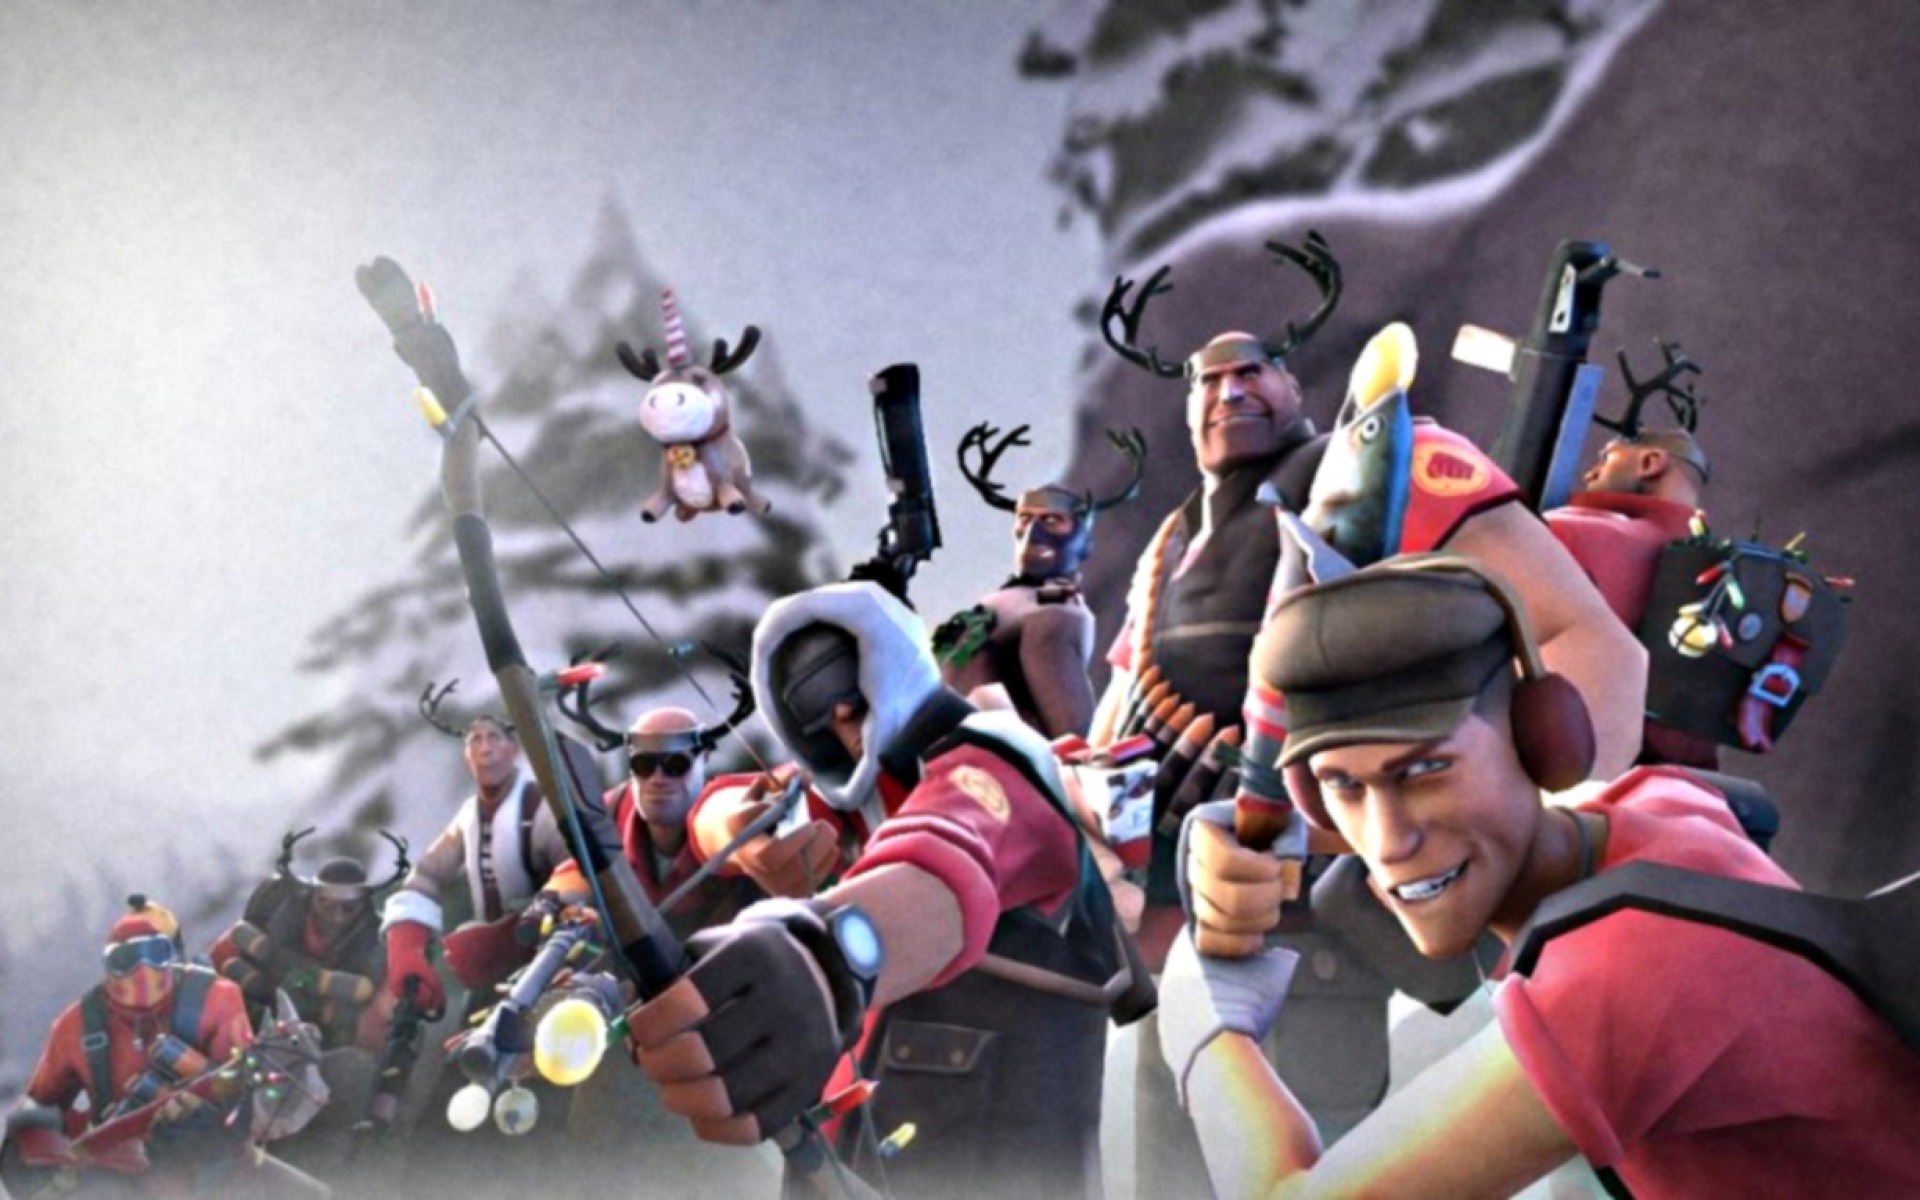 1920x1080 team fortress 2 image